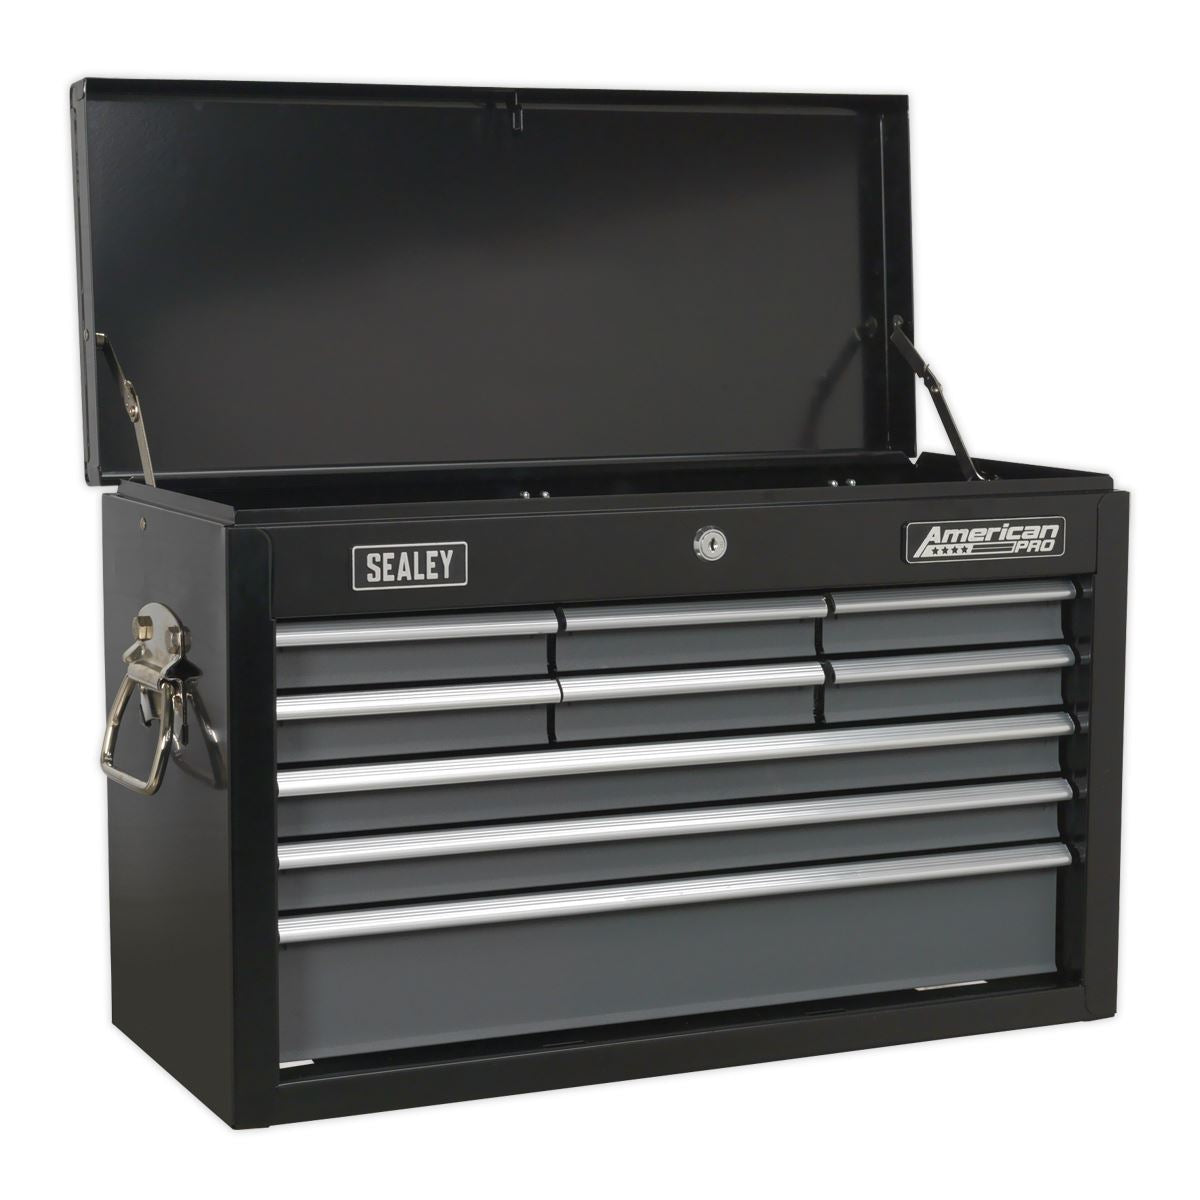 Sealey American Pro Topchest 9 Drawer with Ball-Bearing Slides - Black/Grey